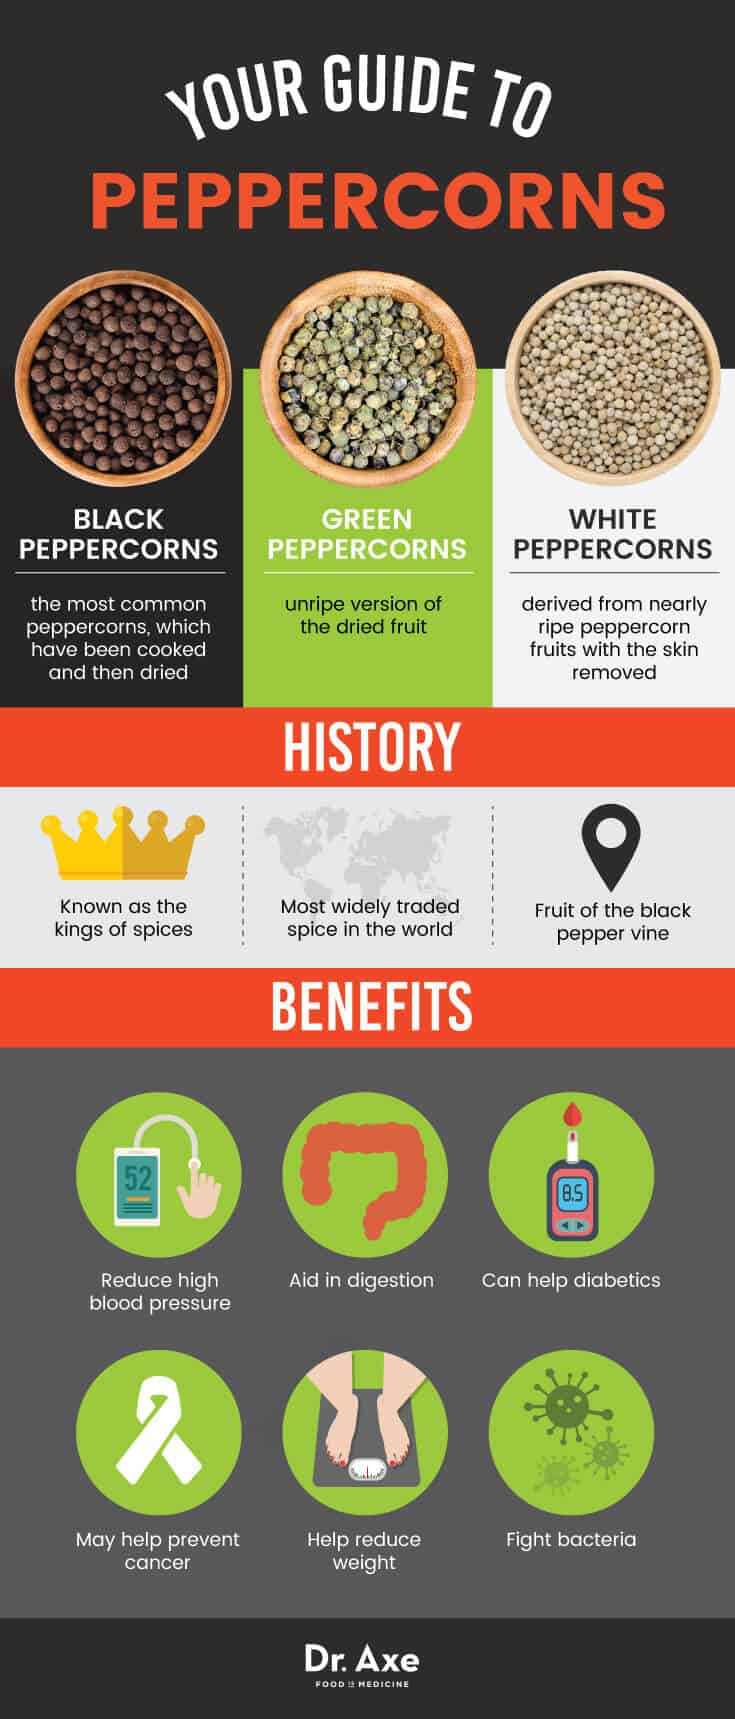 Your guide to peppercorns - Dr. Axe